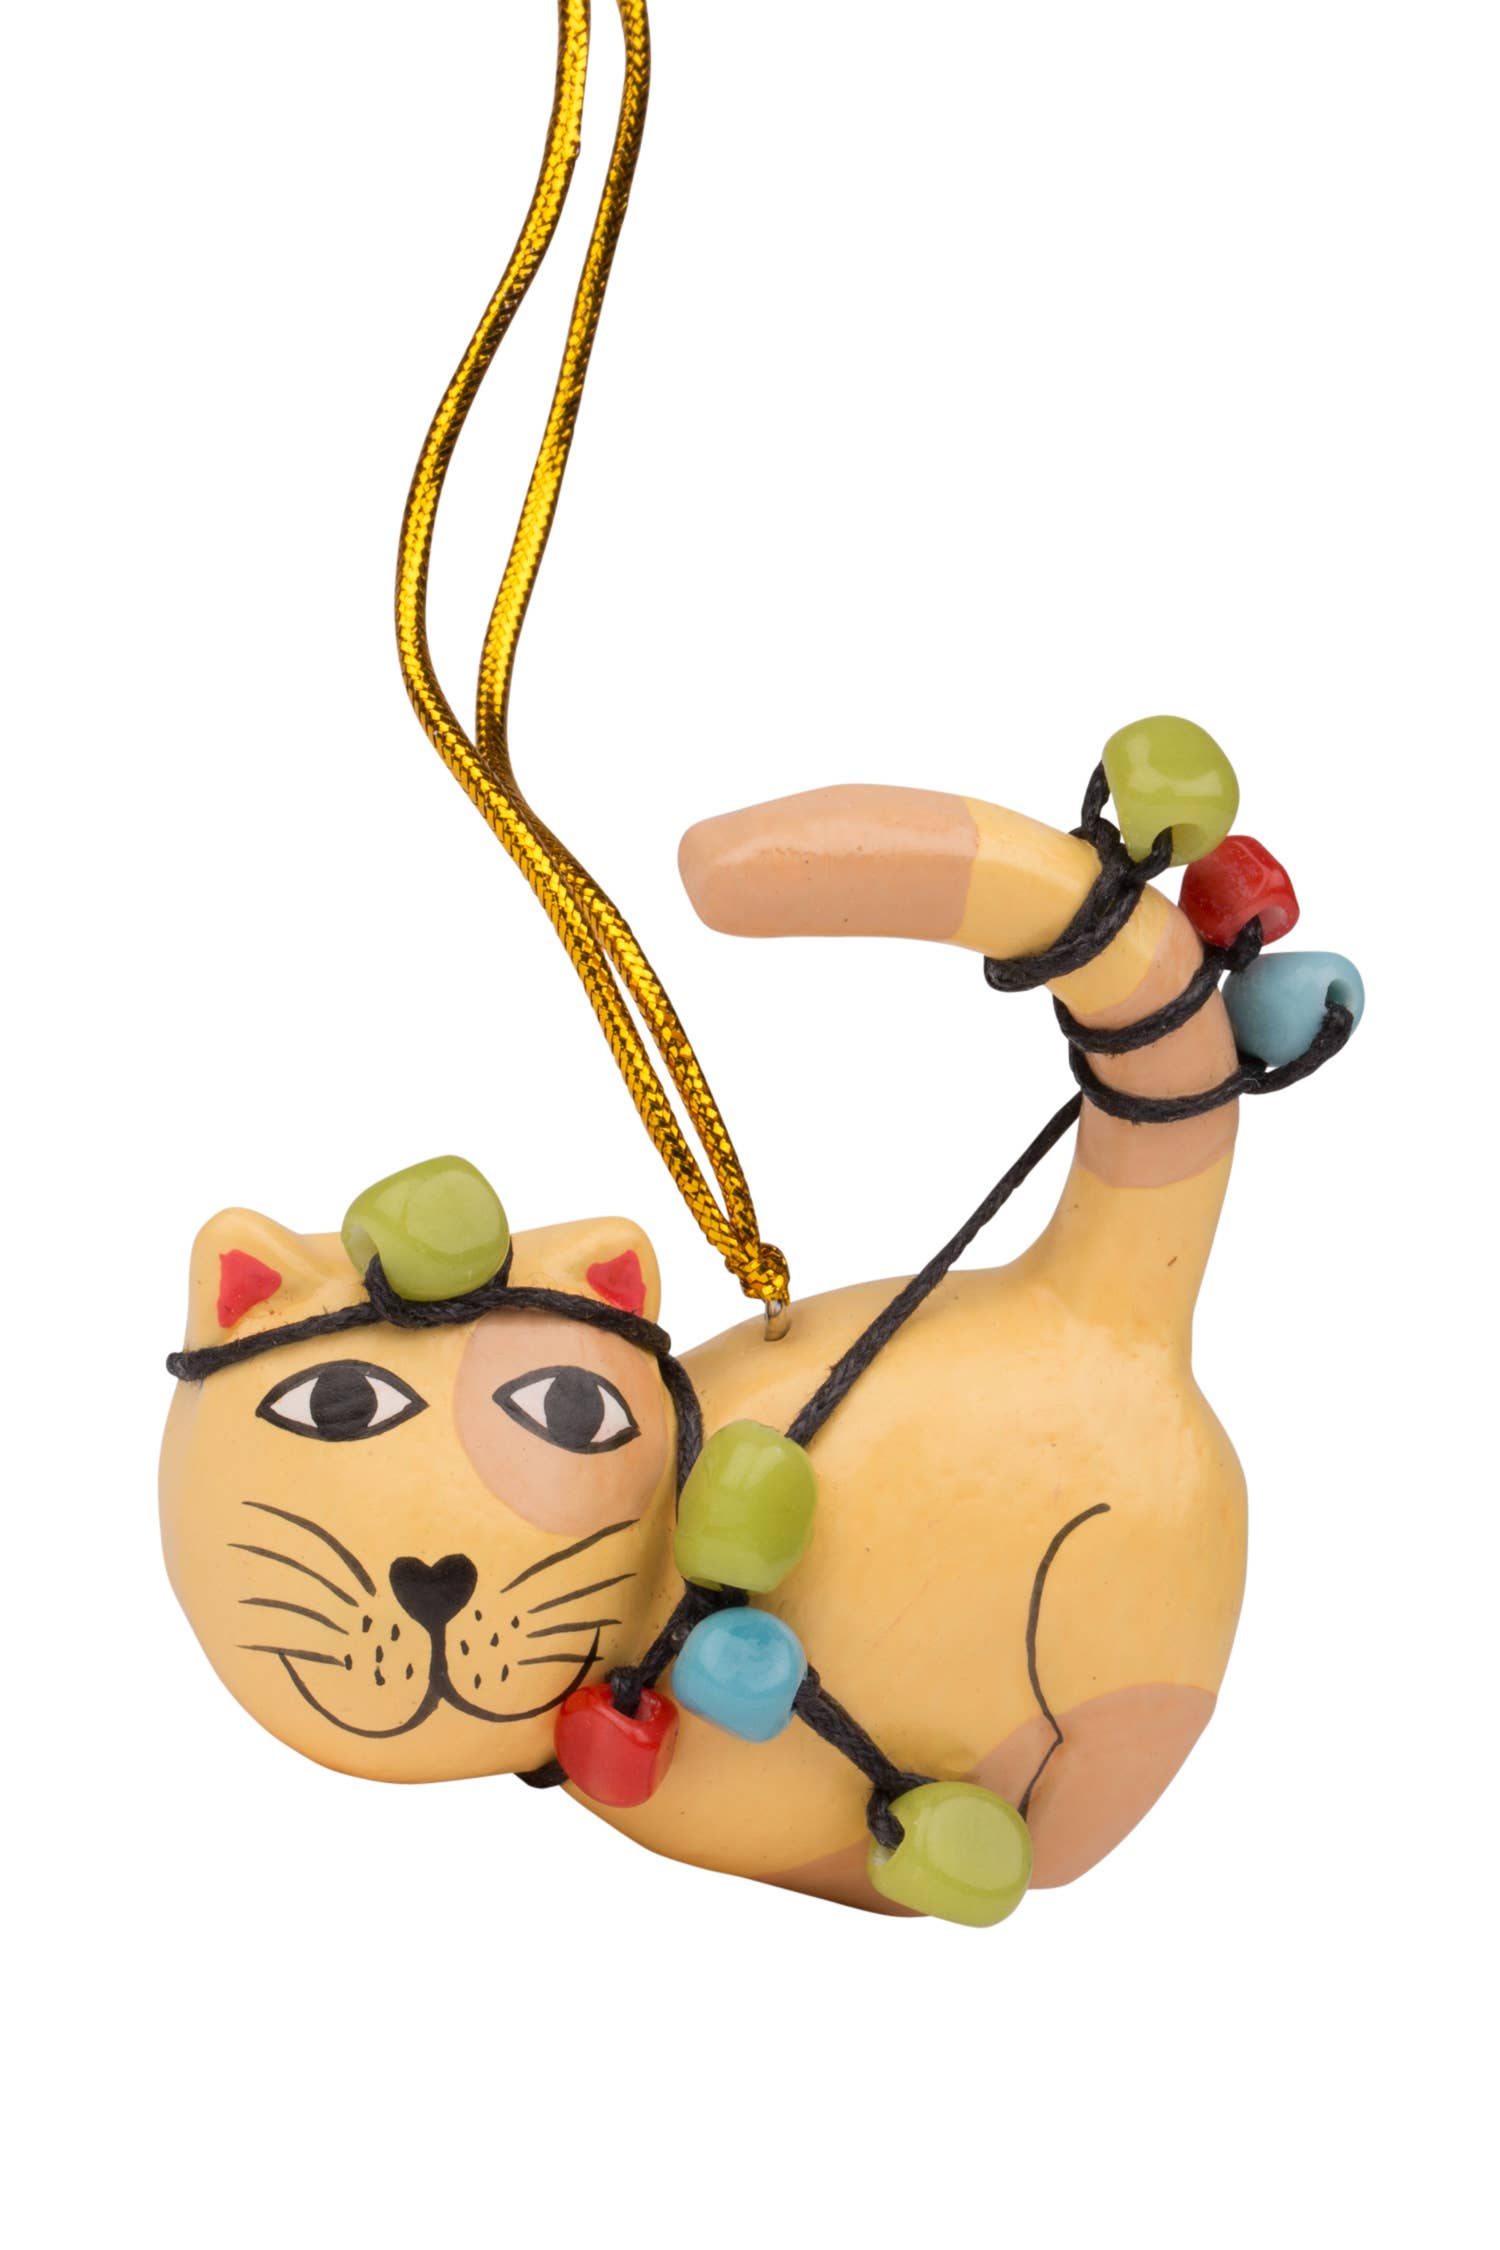 Ten Thousand Villages - Tangled Up Cat Ornament